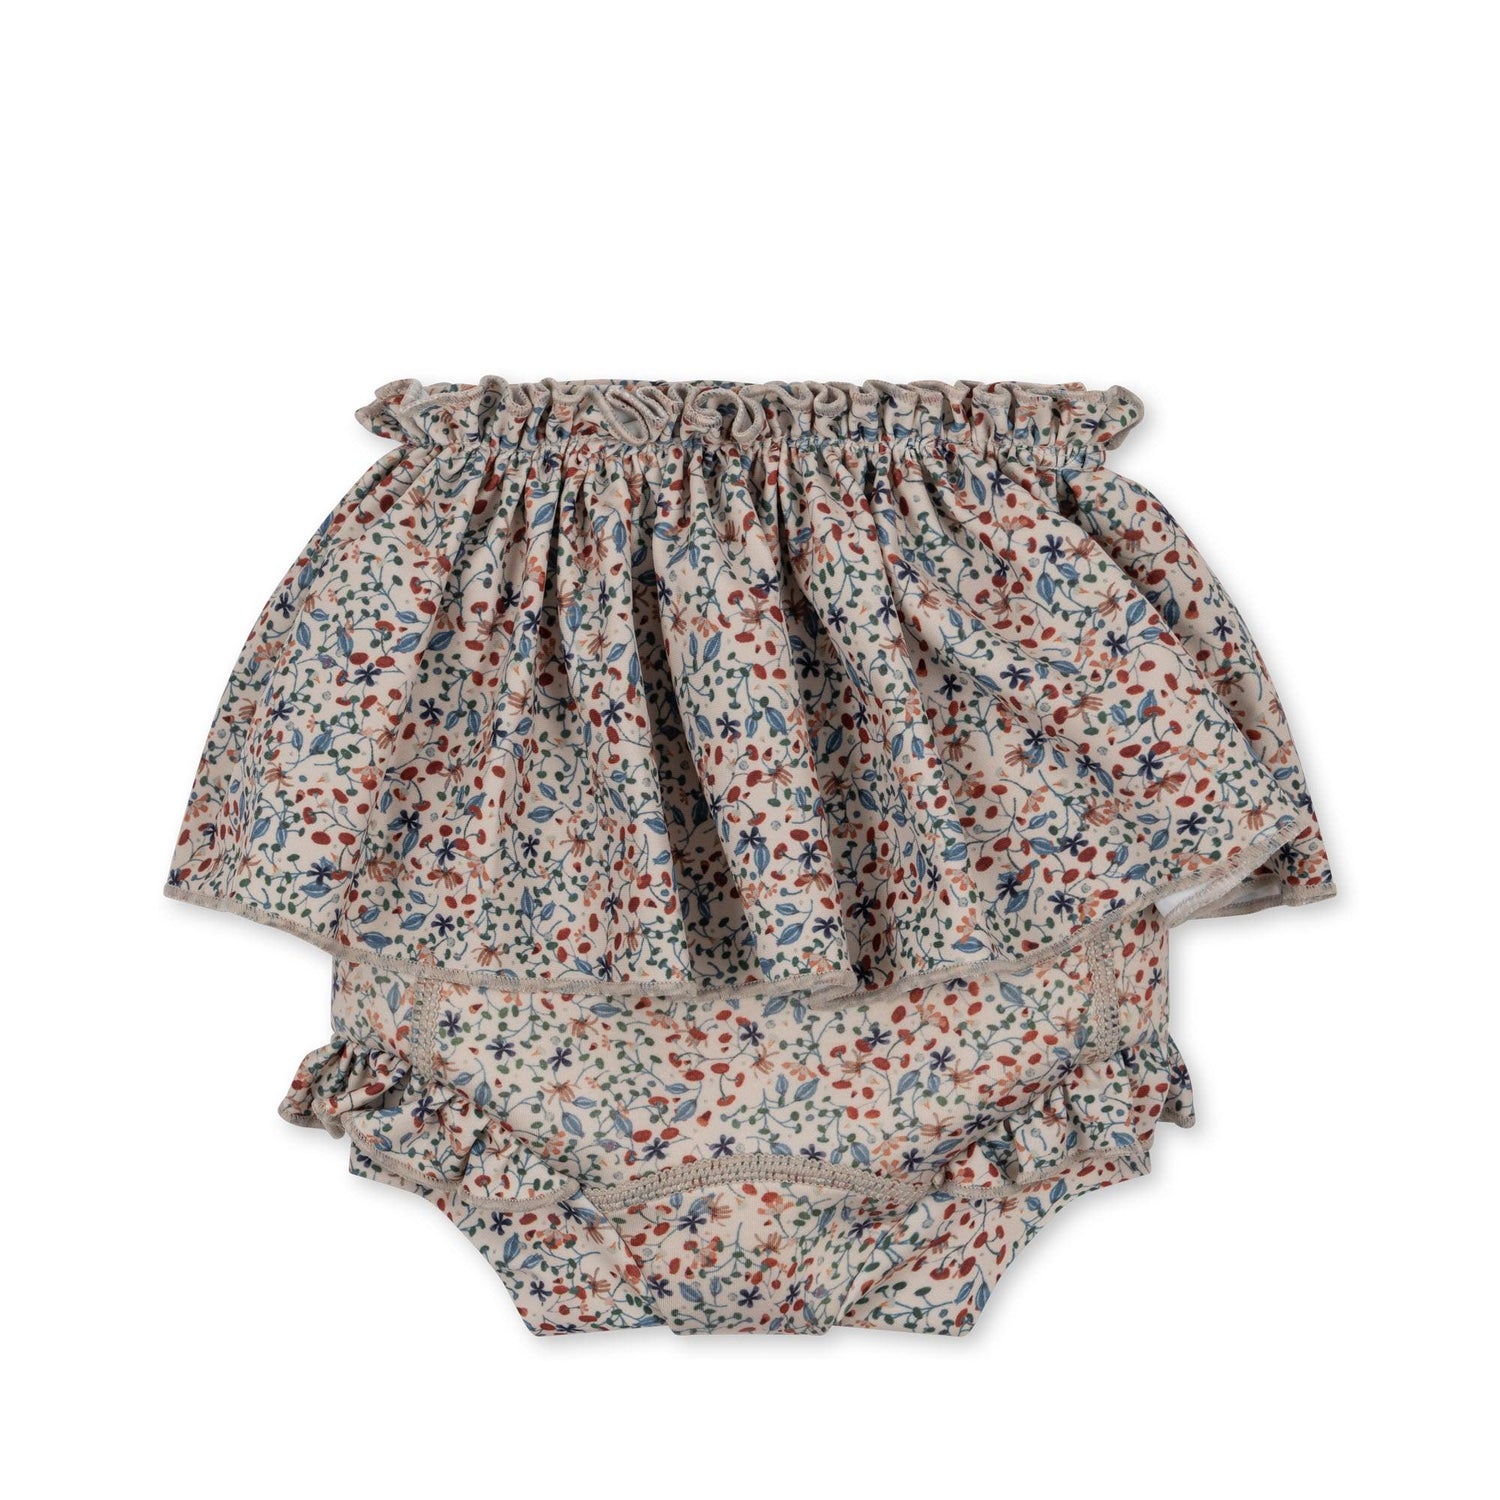 Swimshorts Bobbi Frill 'Louloudi' - The Little One • Family.Concept.Store. 